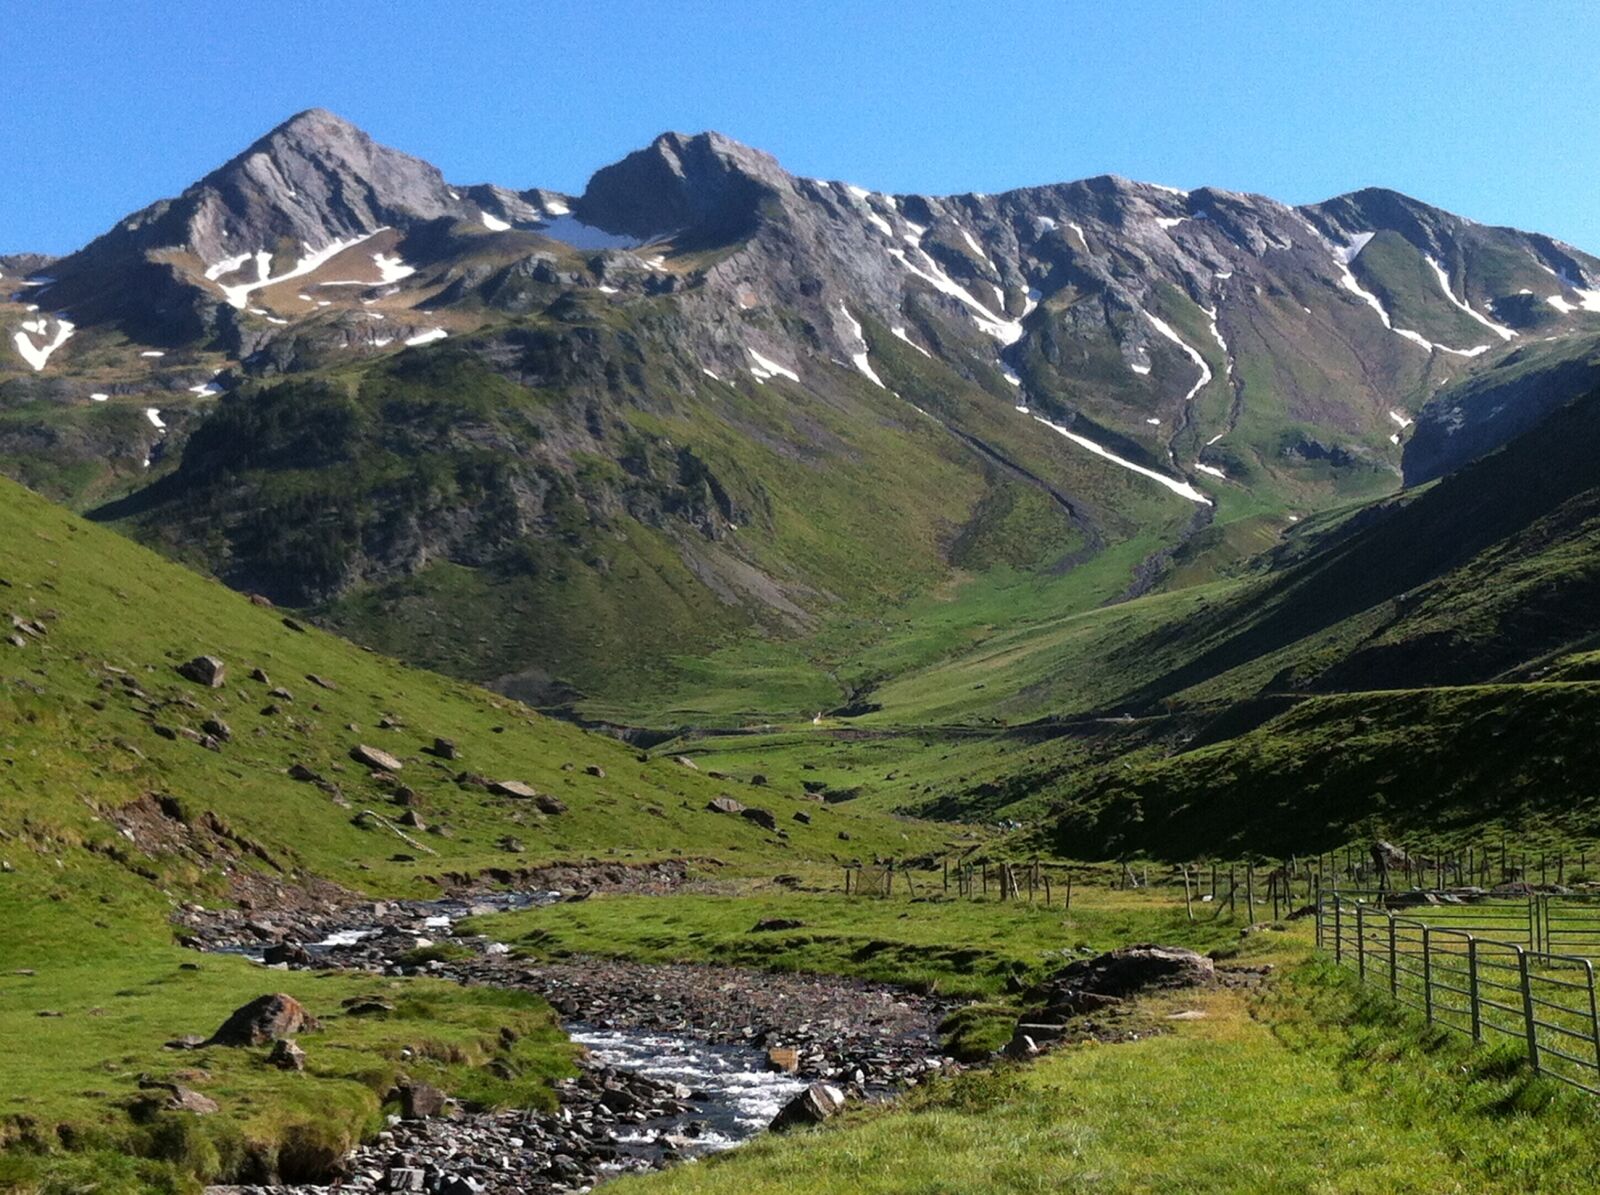 Apple iPhone 4 sample photo. Mountains, pyrenees, france photography